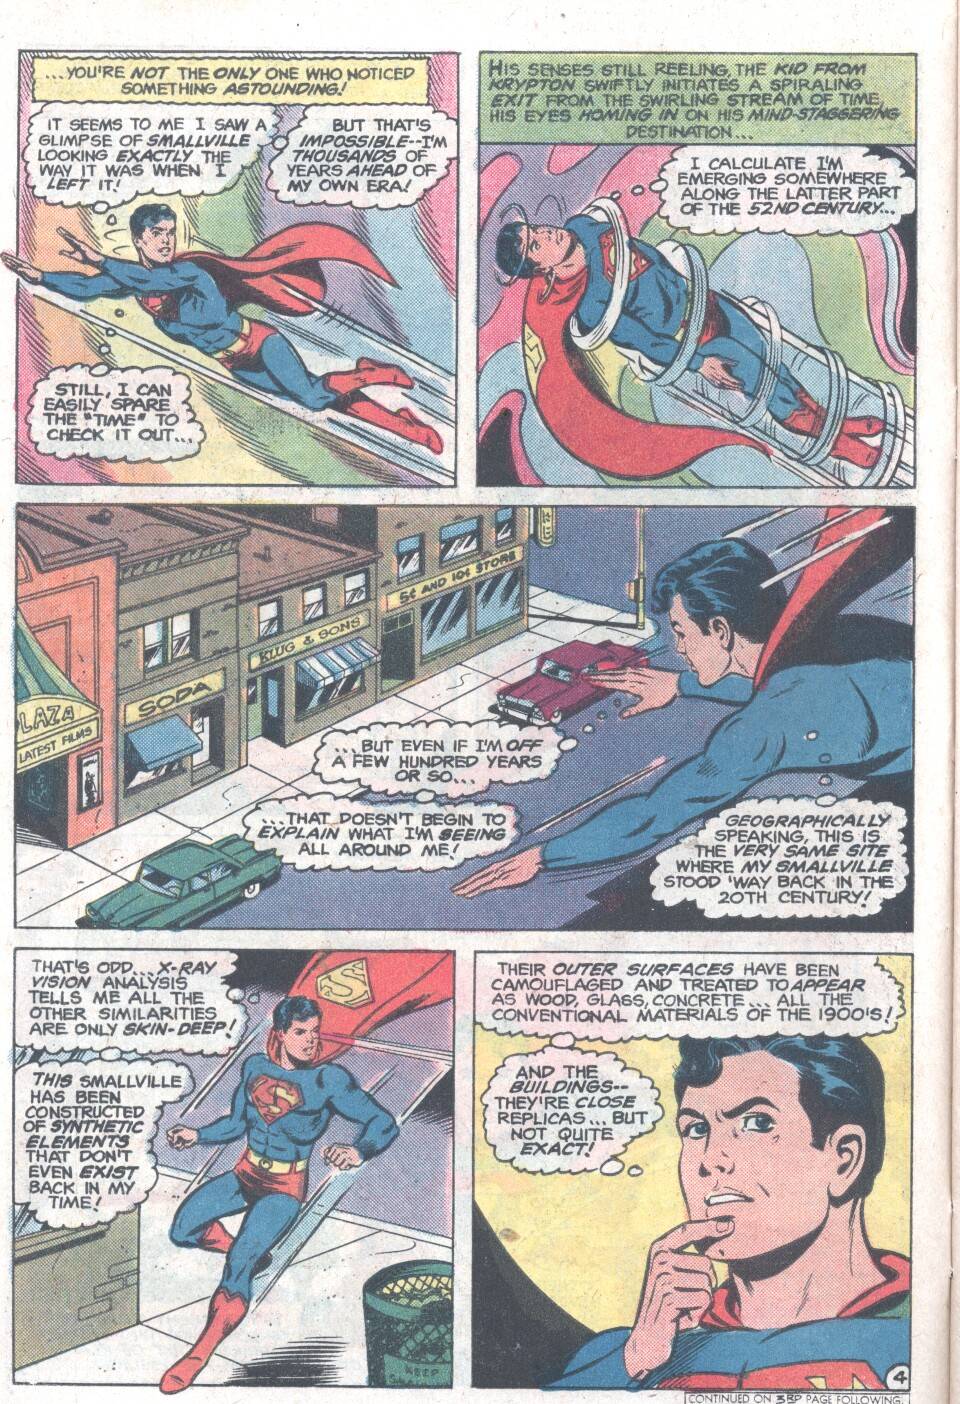 The New Adventures of Superboy 10 Page 4